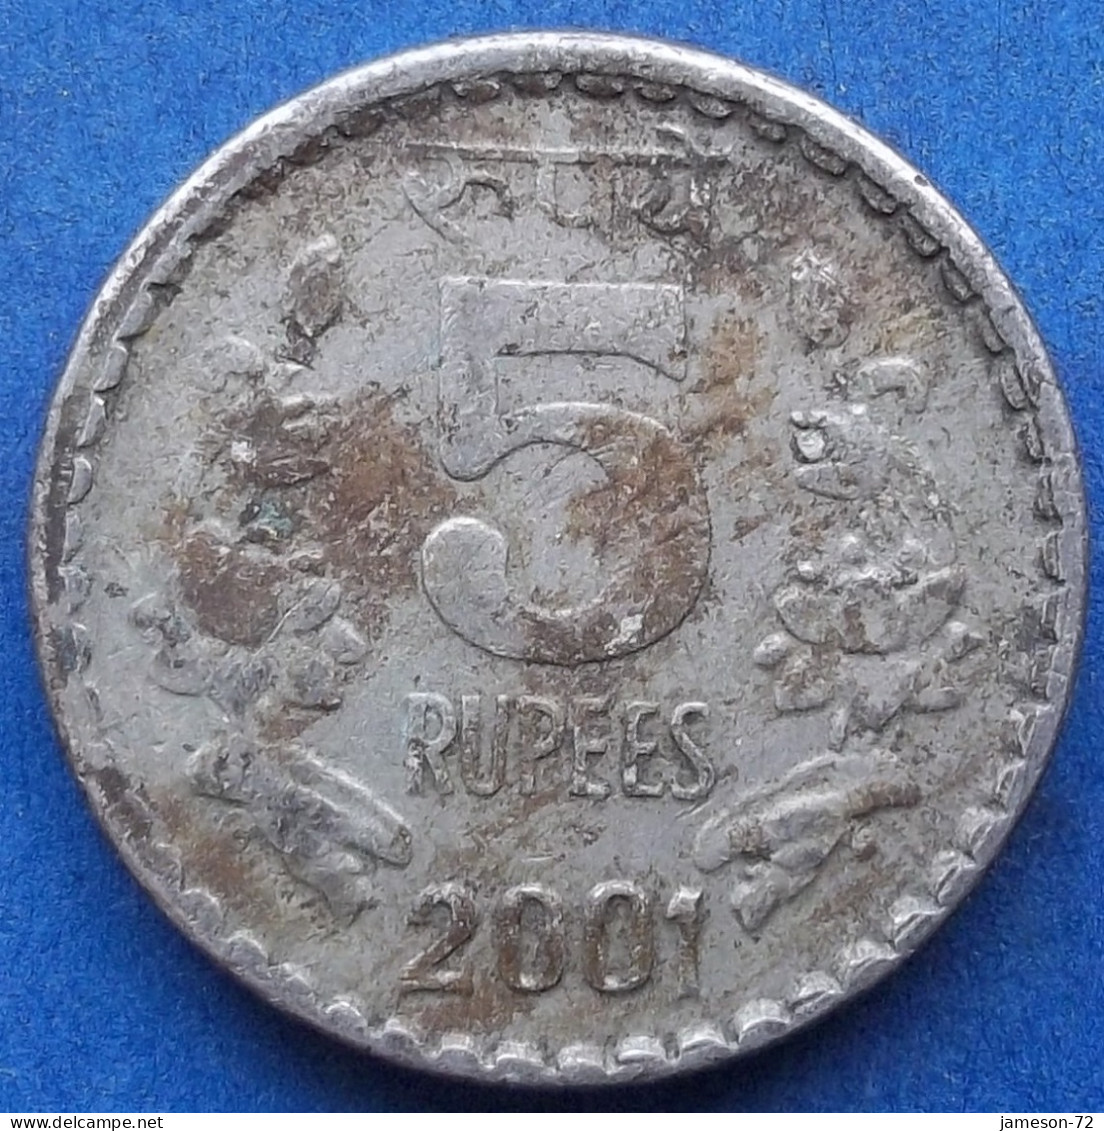 INDIA - 5 Rupees 2001 (C) "Lotus Flowers" KM# 154.2 Republic Decimal Coinage (1957) - Edelweiss Coins - Georgia